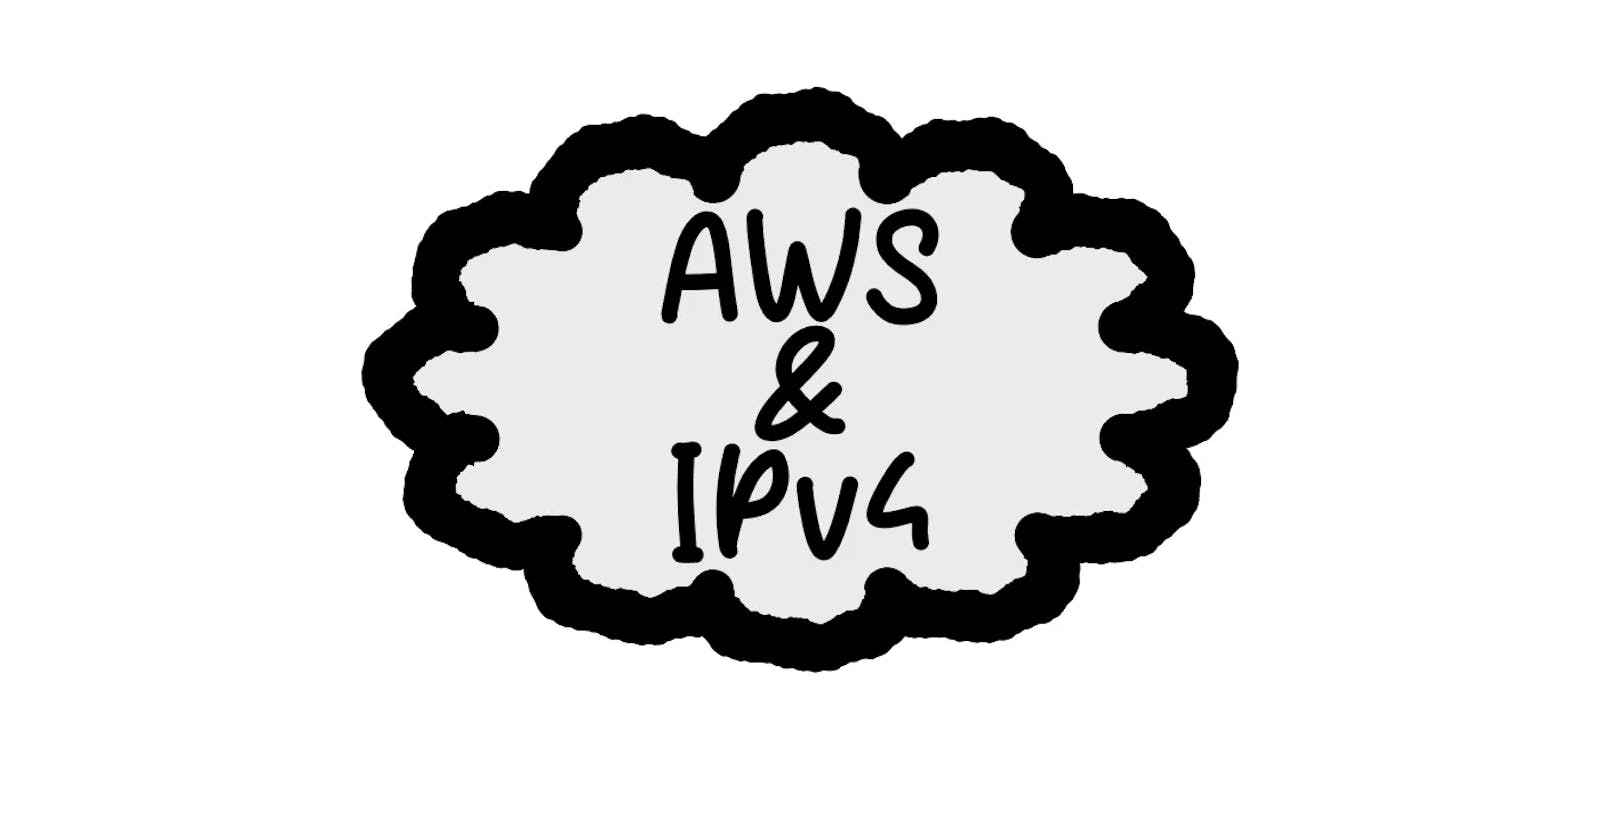 AWS to begin charging for public IPv4 addresses